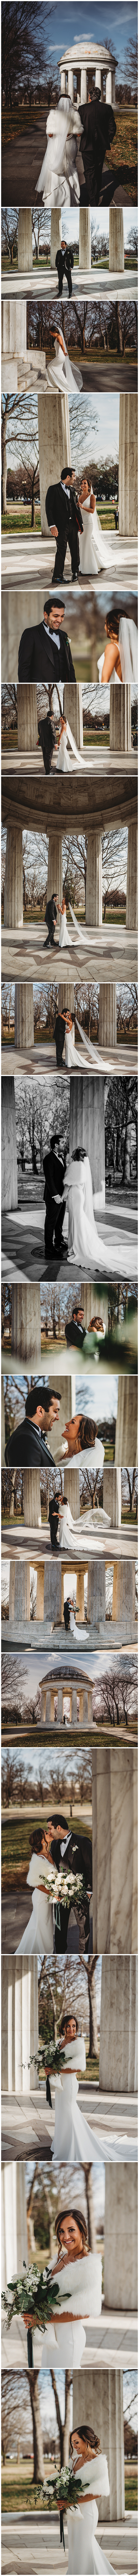 The bride and groom's first look at the War Memorial in Washington D.C. taken by Brittany Dunbar Photography, a Washington D.C. Wedding Photographer. 